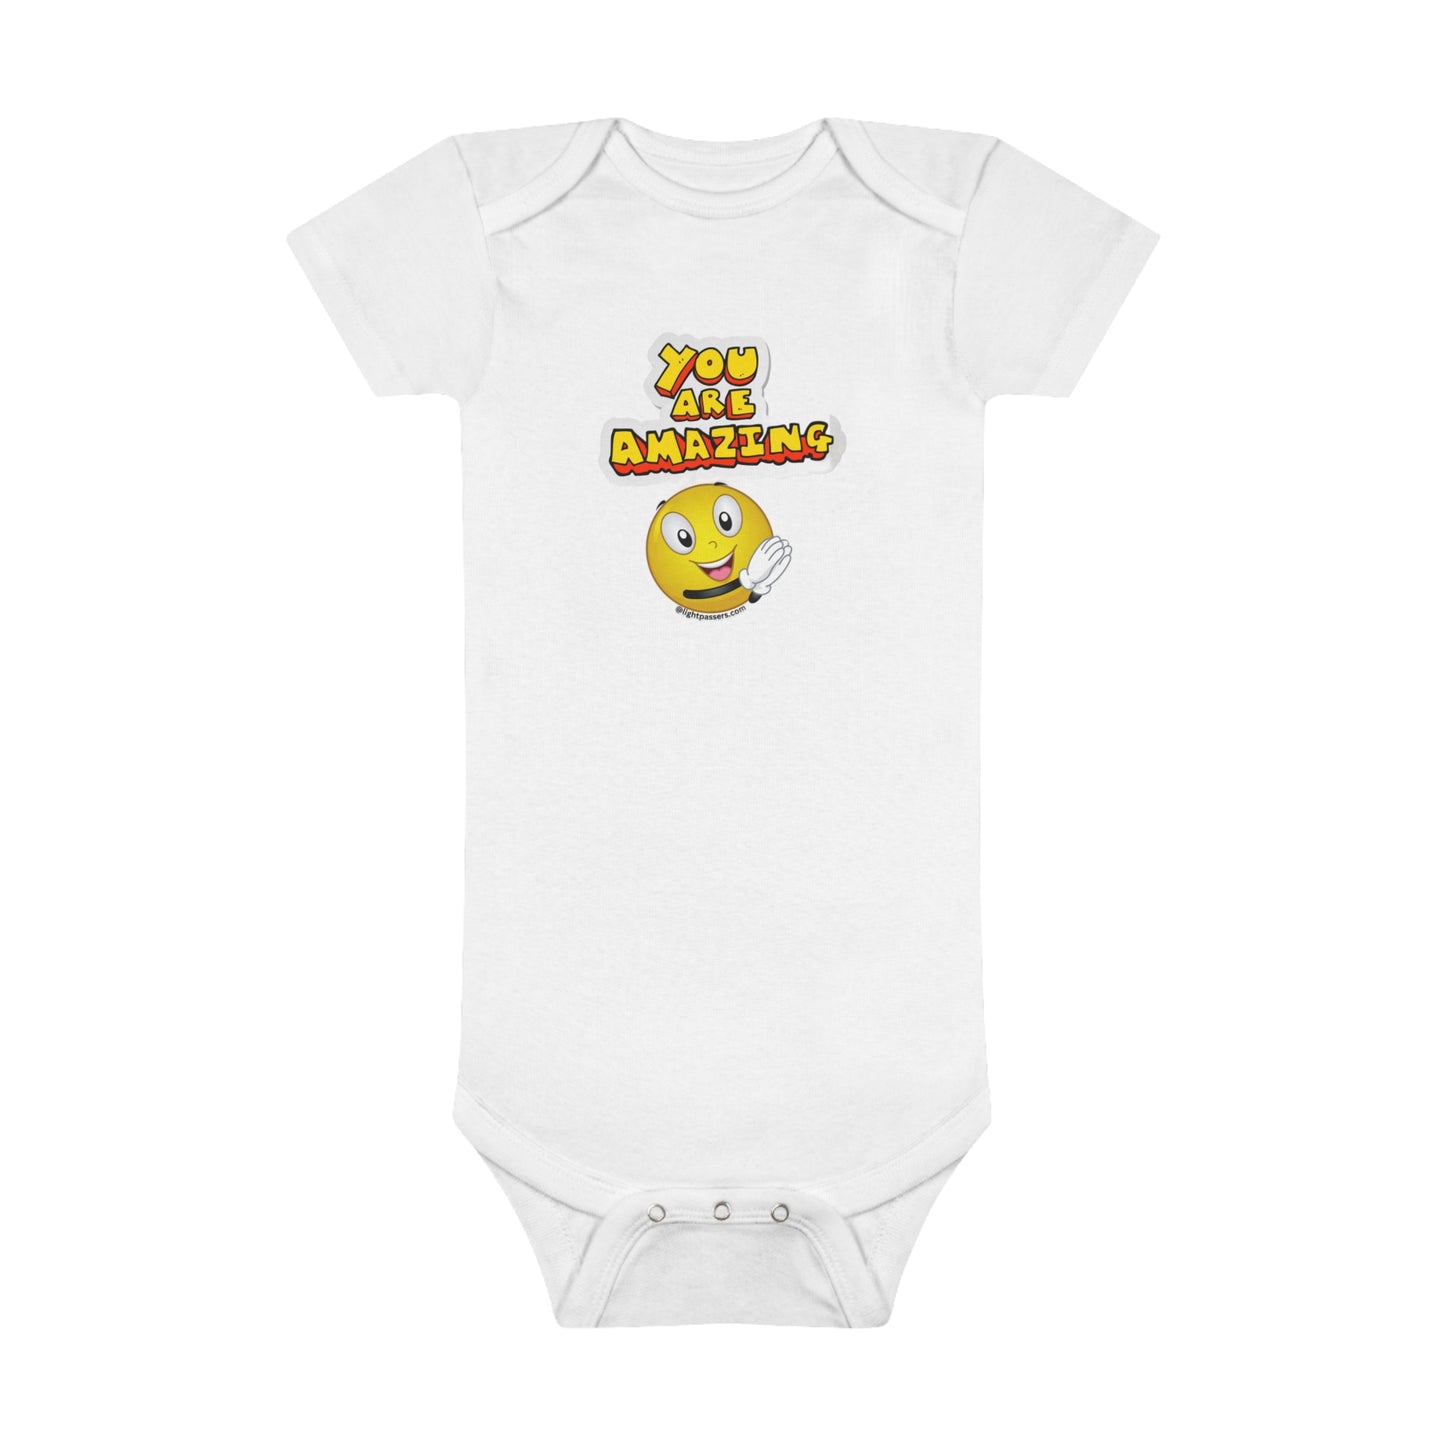 LIght Passers Marketplace You are Amazing Onesie® Organic Baby Bodysuit in White Simple Messages, Mental Health